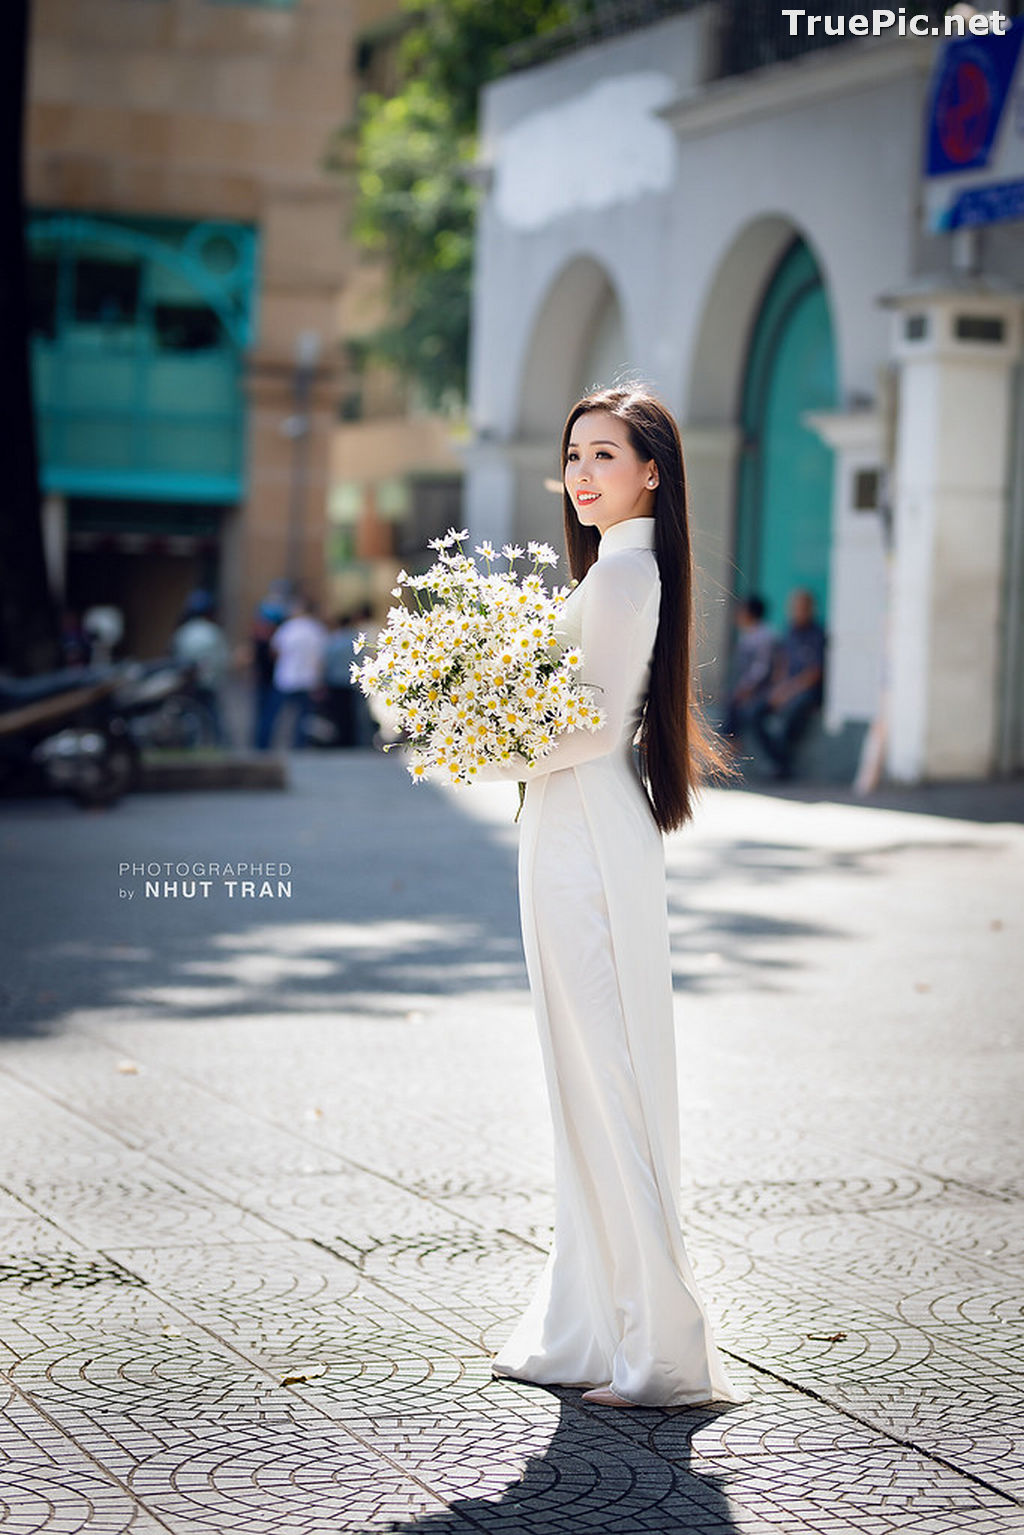 Image The Beauty of Vietnamese Girls with Traditional Dress (Ao Dai) #5 - TruePic.net - Picture-45